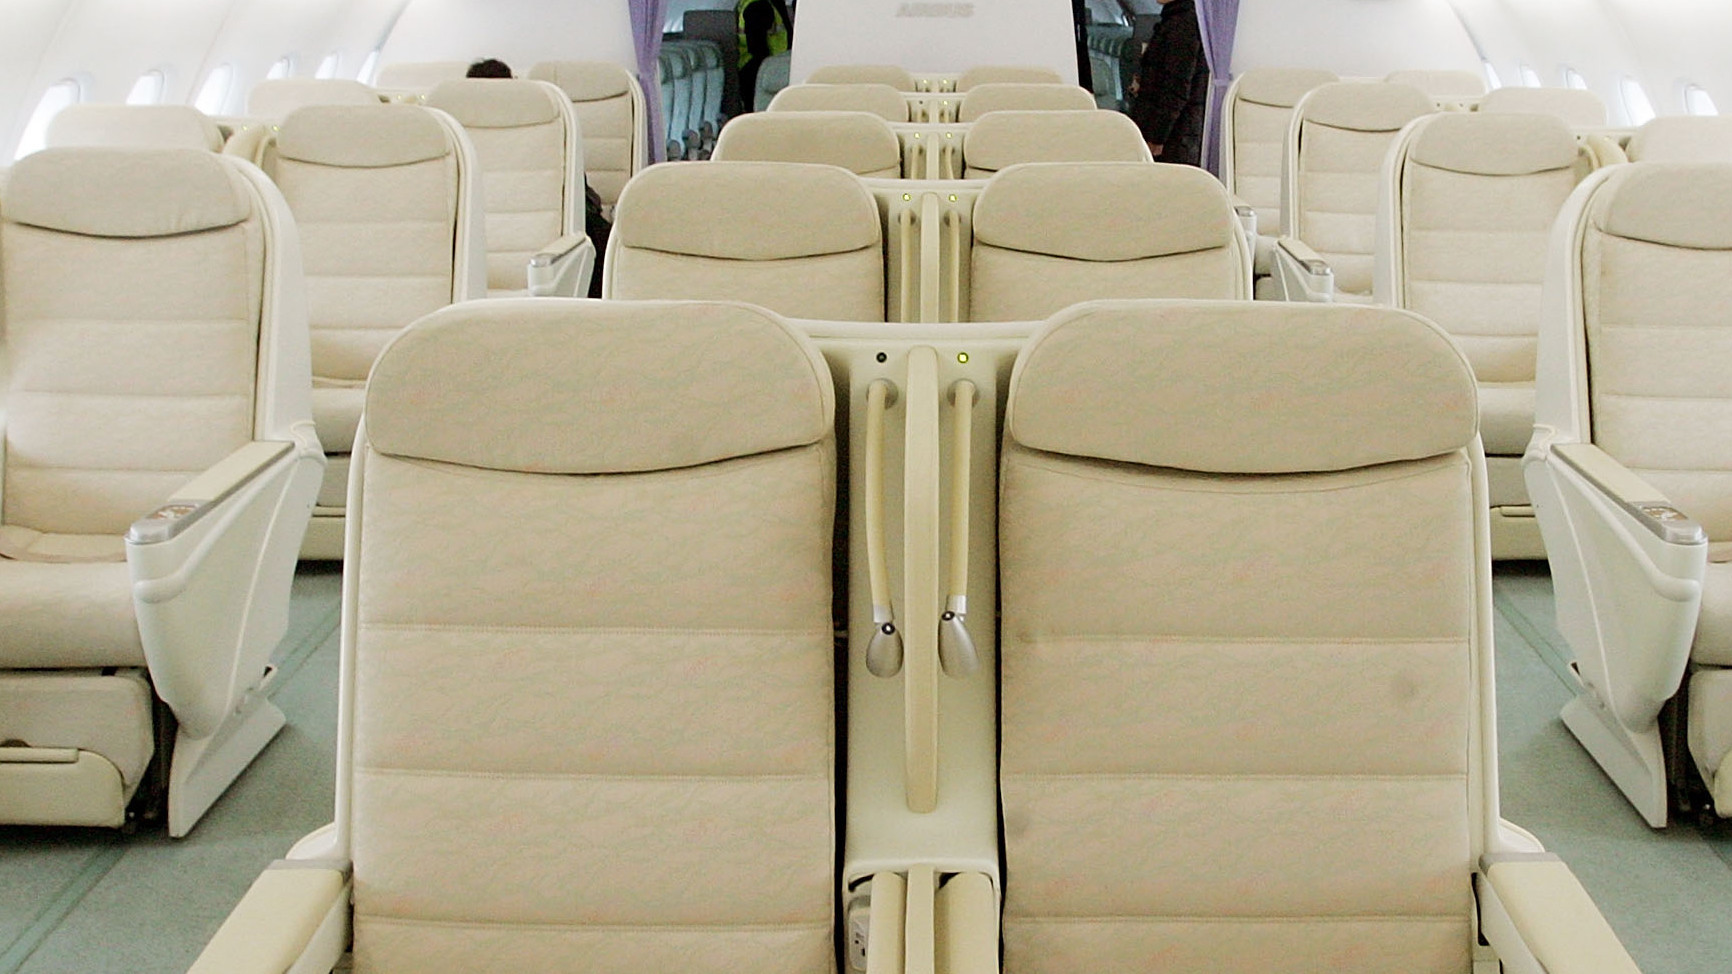 Travel etiquette: Armrests, reclining seats, snoring and more - Chicago Tribune